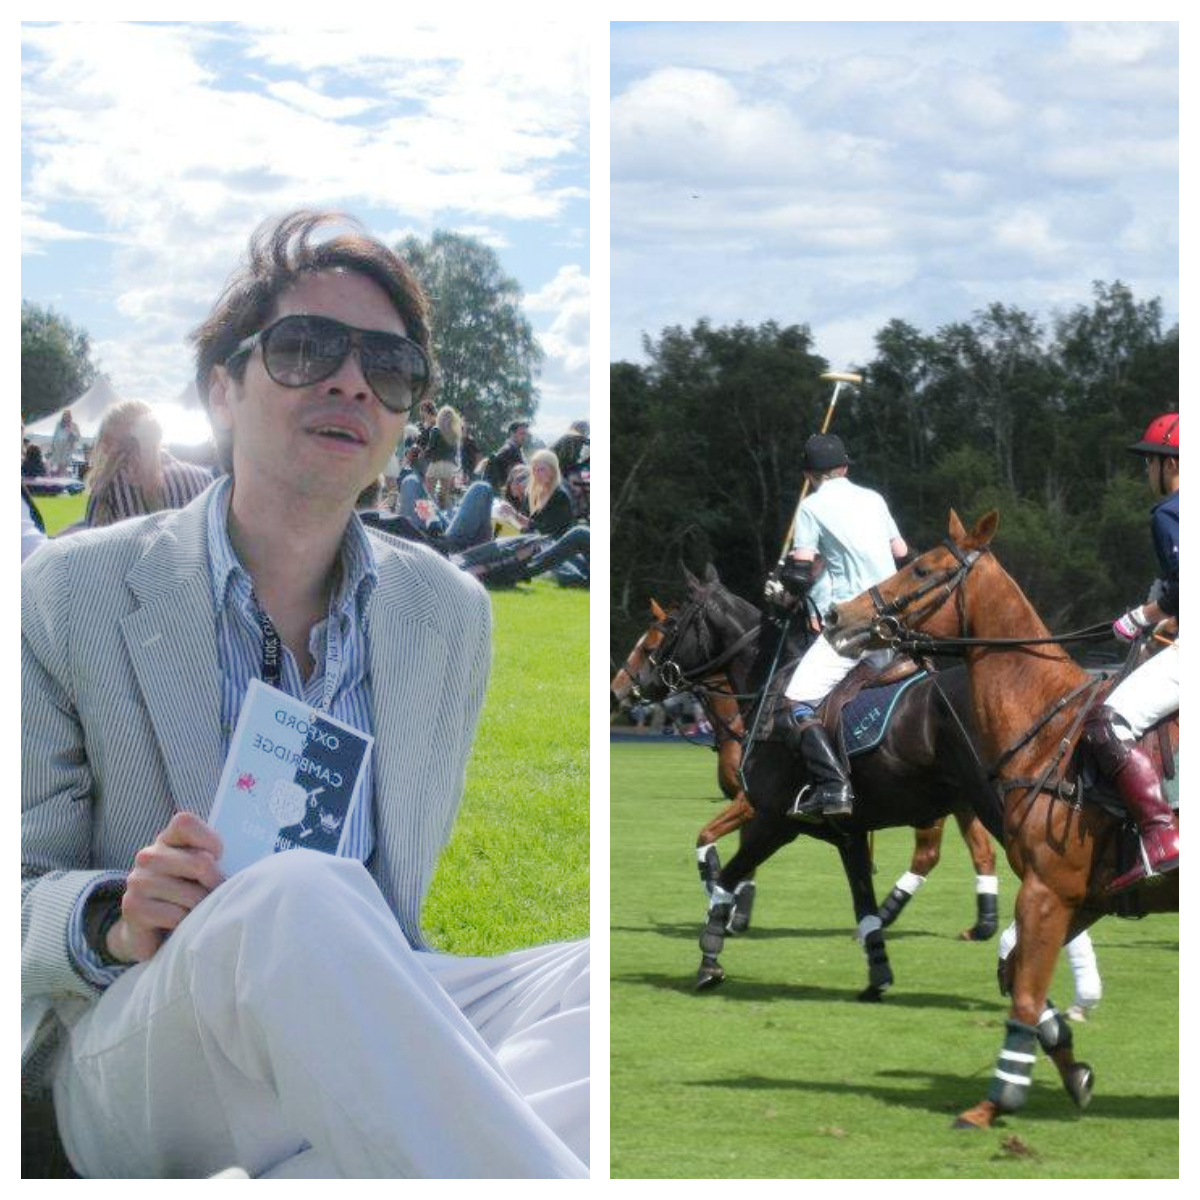 What to wear to the polo match